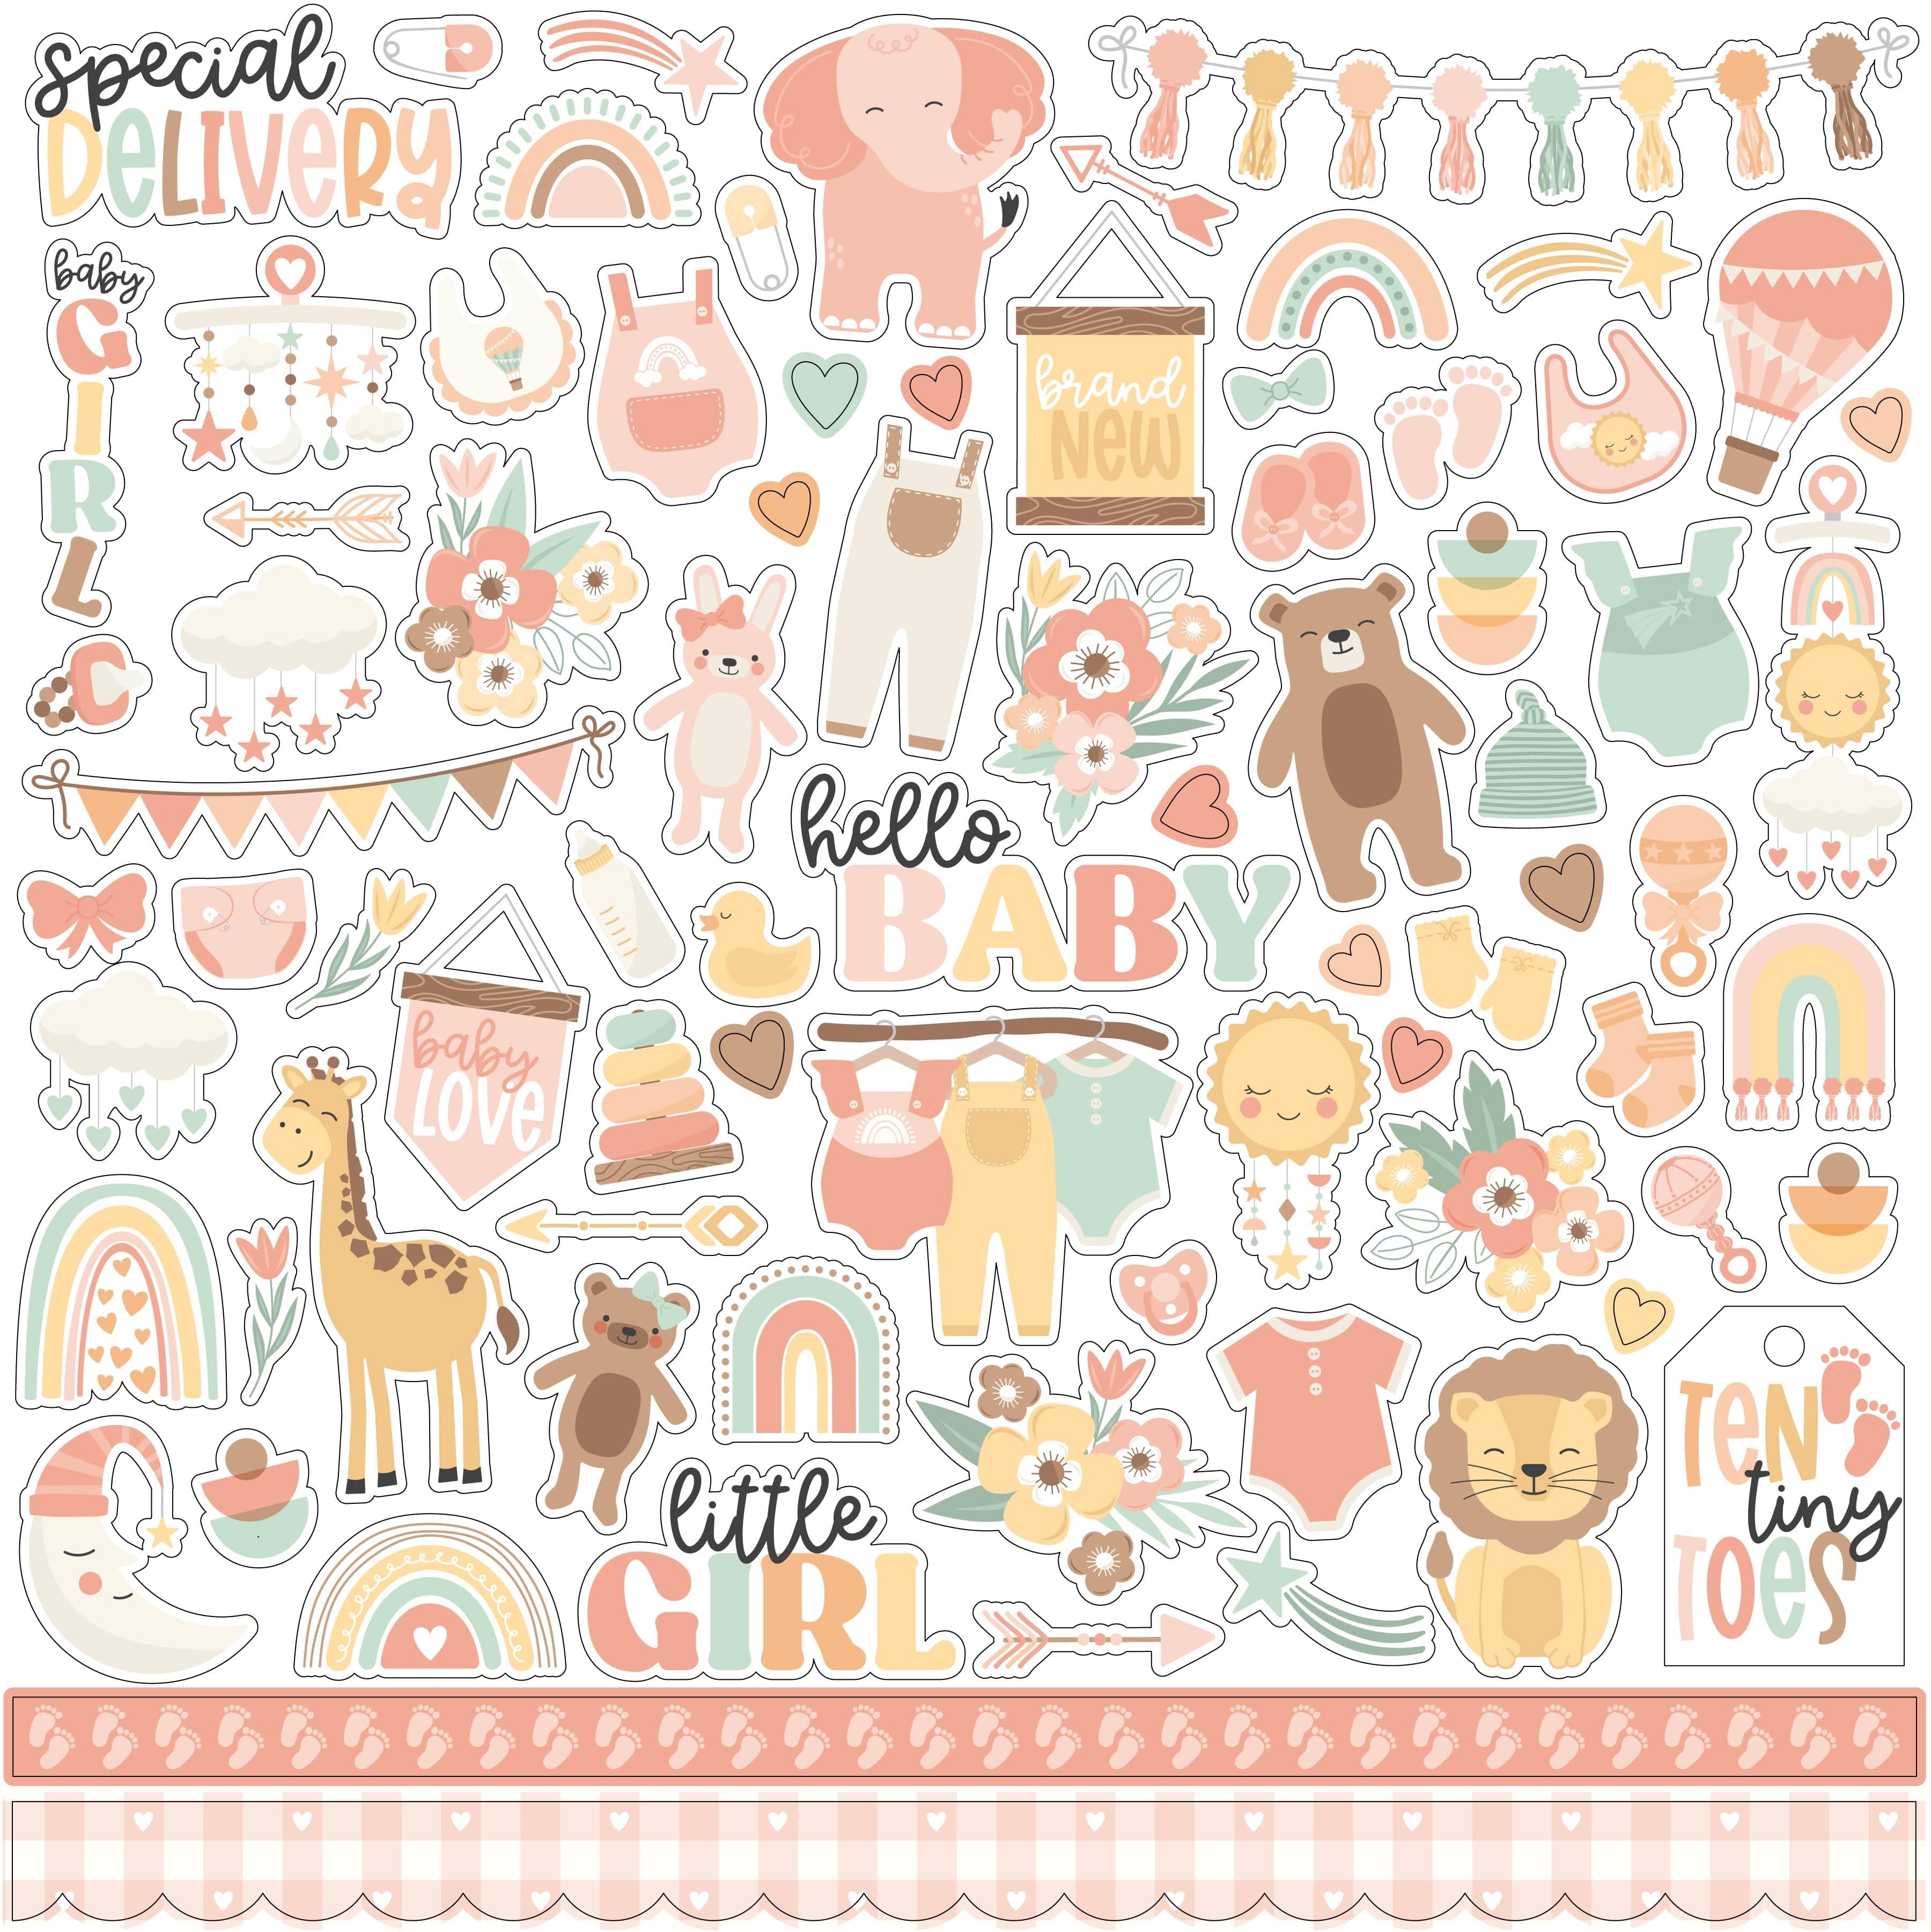 Our Baby Girl Collection 12 x 12 Scrapbook Sticker Sheet by Echo Park Paper - Scrapbook Supply Companies